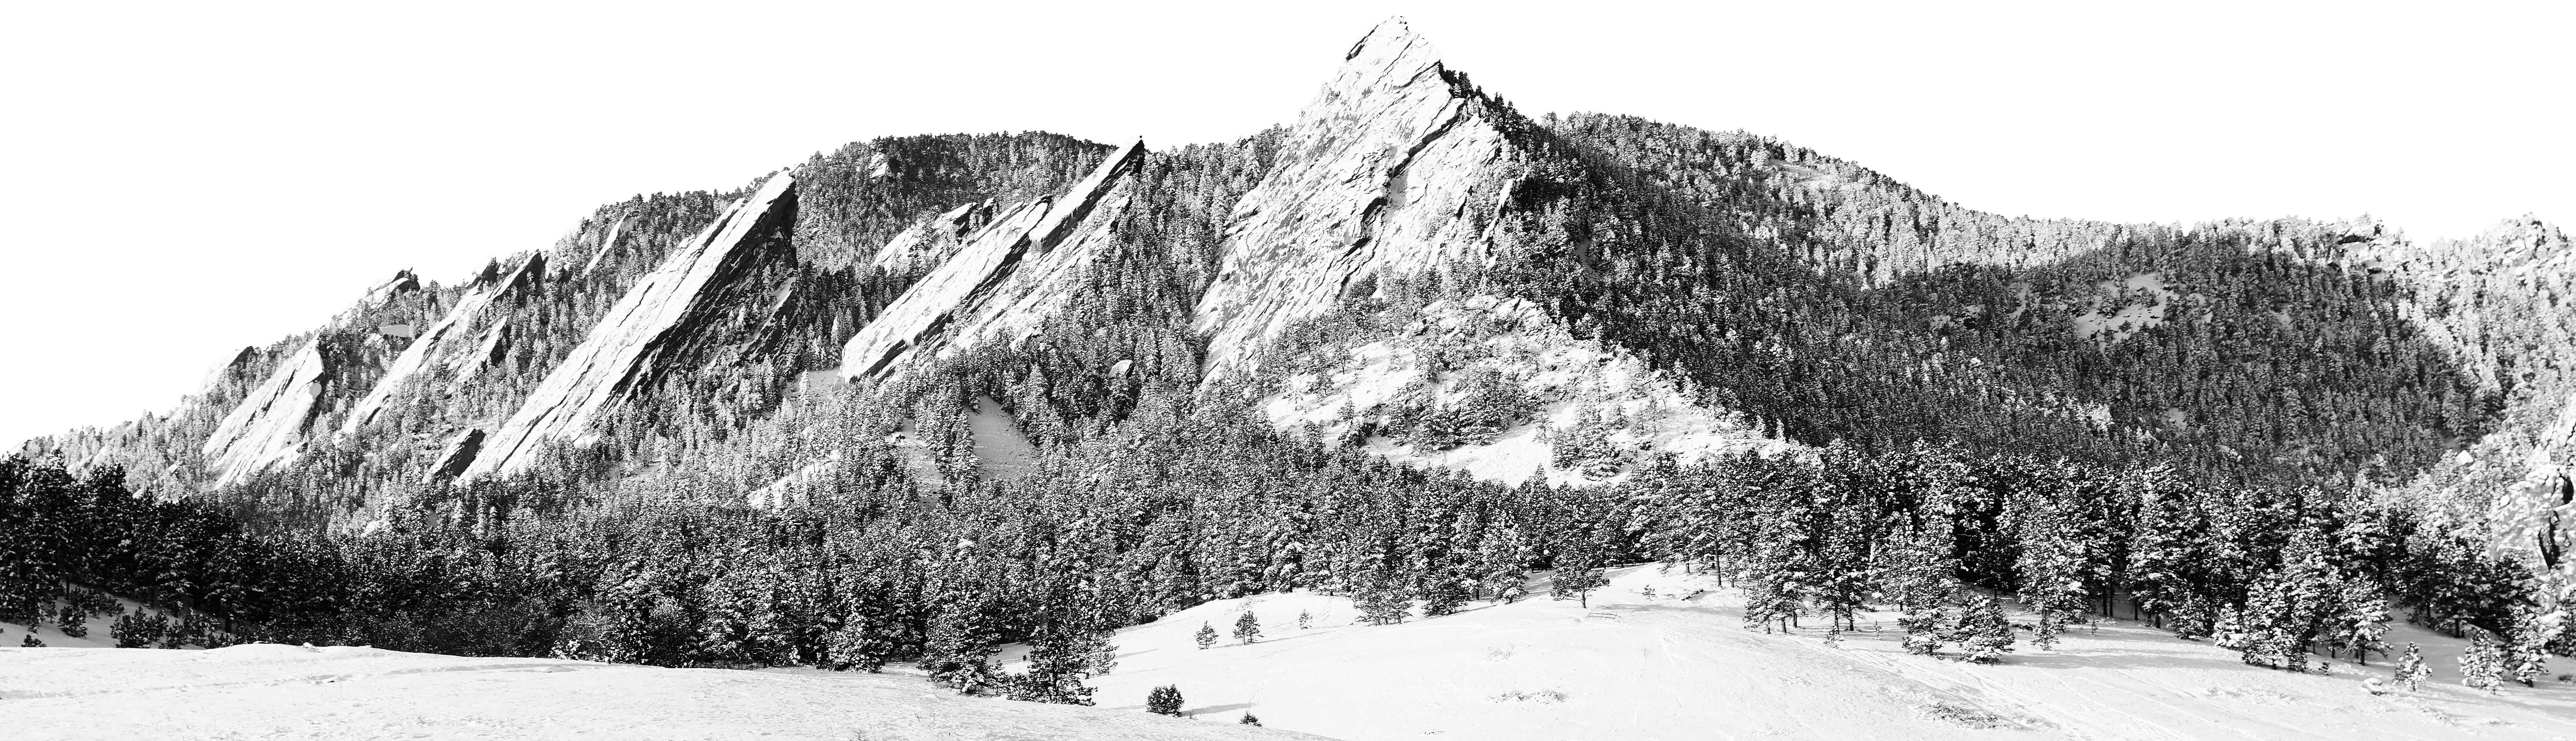 Black and white photo of the Flatiron rock formation in winter